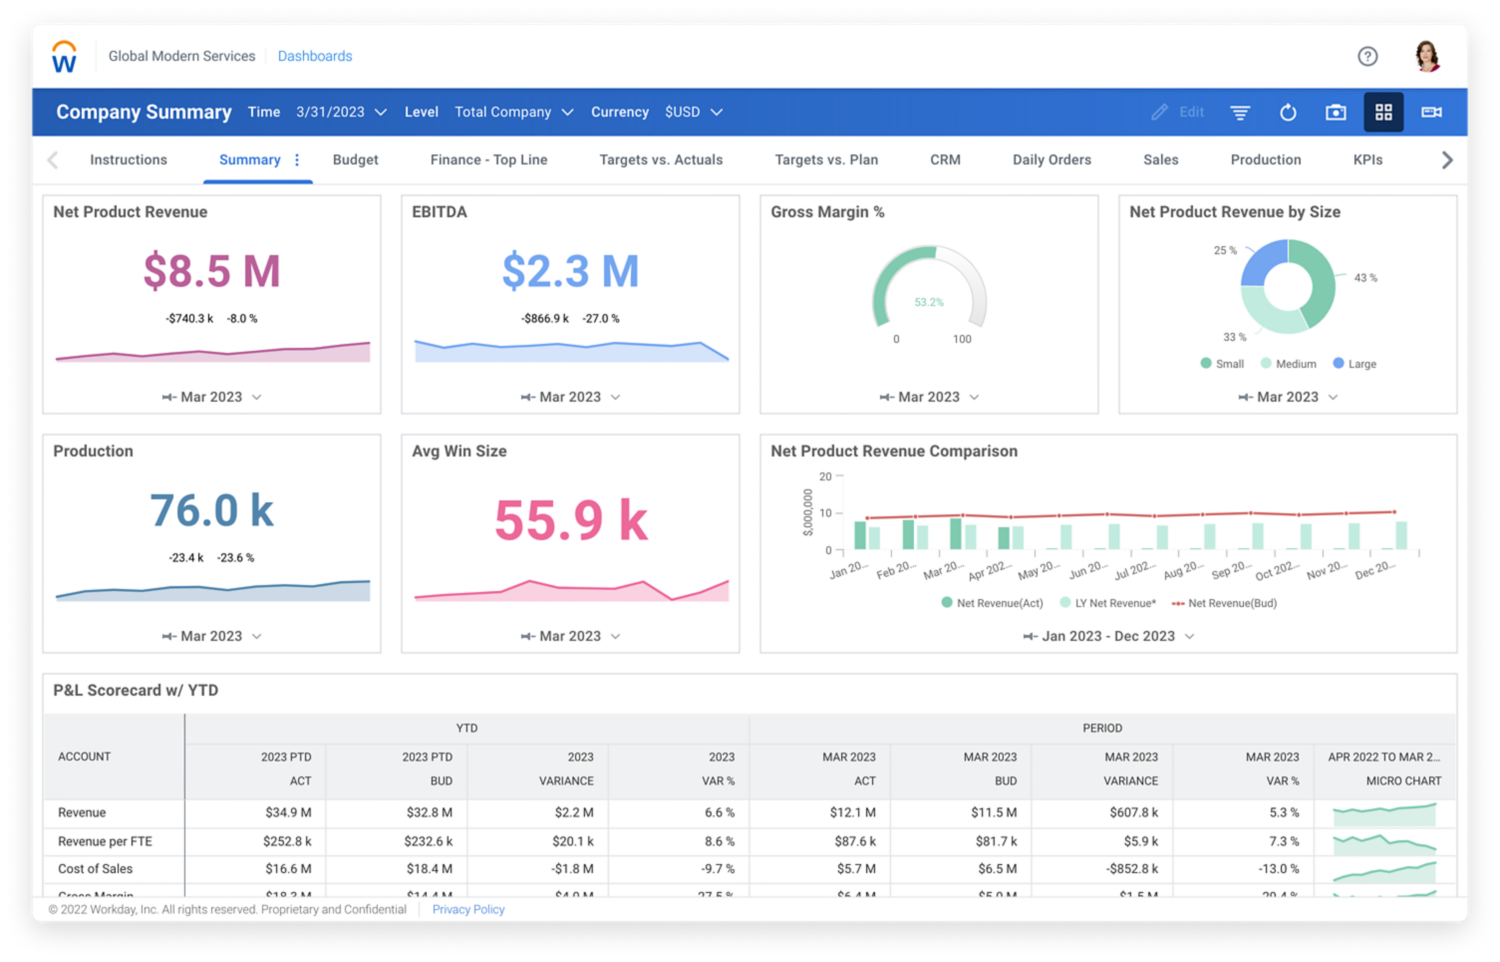 Workday Adaptive Planning's financial analytics dashboard showing bar graphs and numerical values for Top Line finance including Net Product Revenue, Gross Margin percent